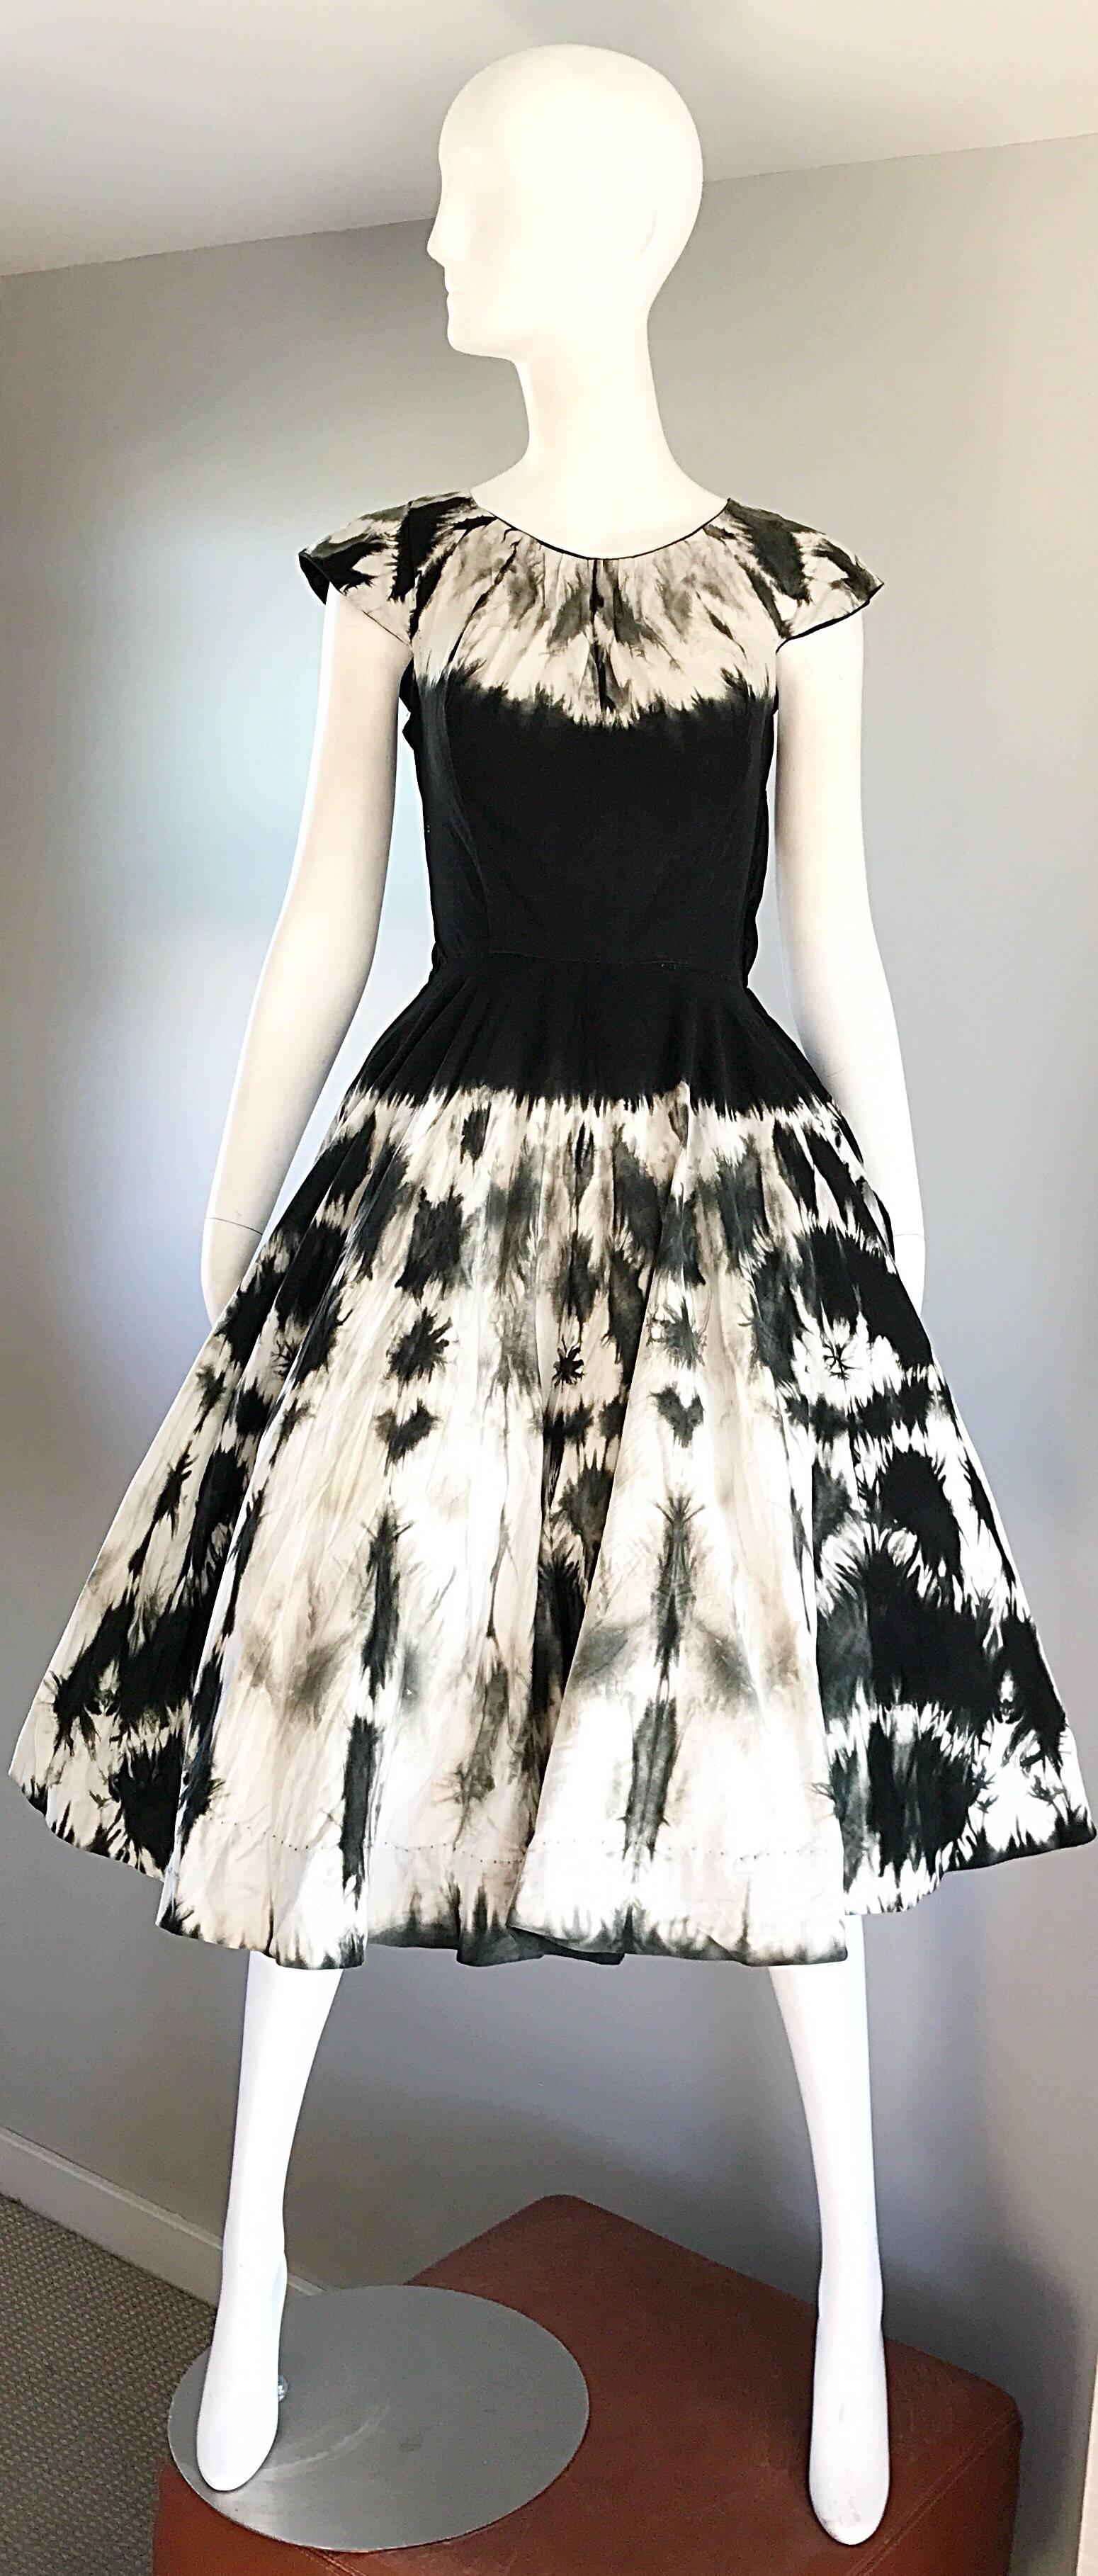 Rare and wonderful 1950s MADALYN MILLER black, white and grey tie dye print cotton fit n' flare dress! Features a fitted cap sleeved tailored bodice, with a flattering and forgiving full skirt. Full metal zipper up the side with hook-and-eye